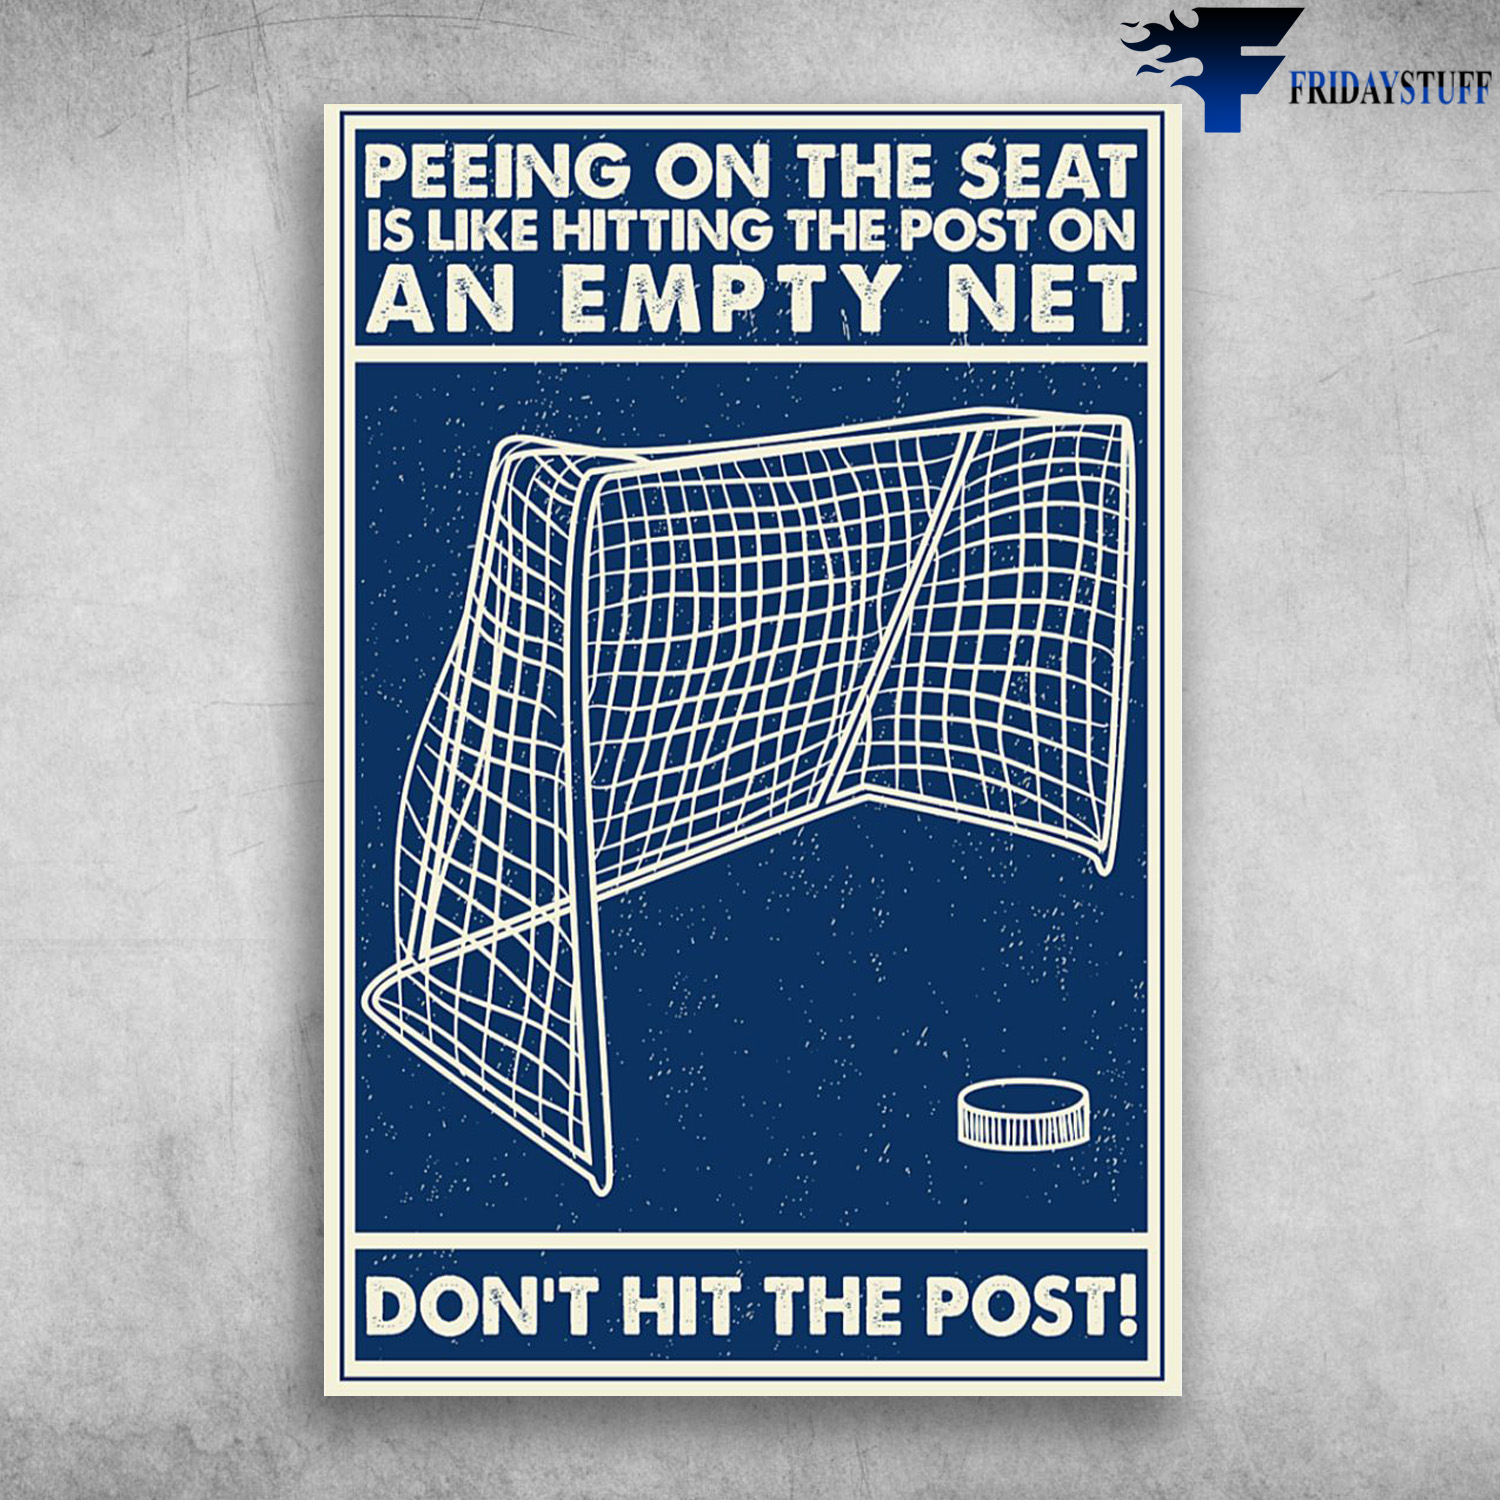 Hockey Goal Frame - Peeing On The Seat Is Like Hitting The Post On An Empty Net, Don't Hit The Post